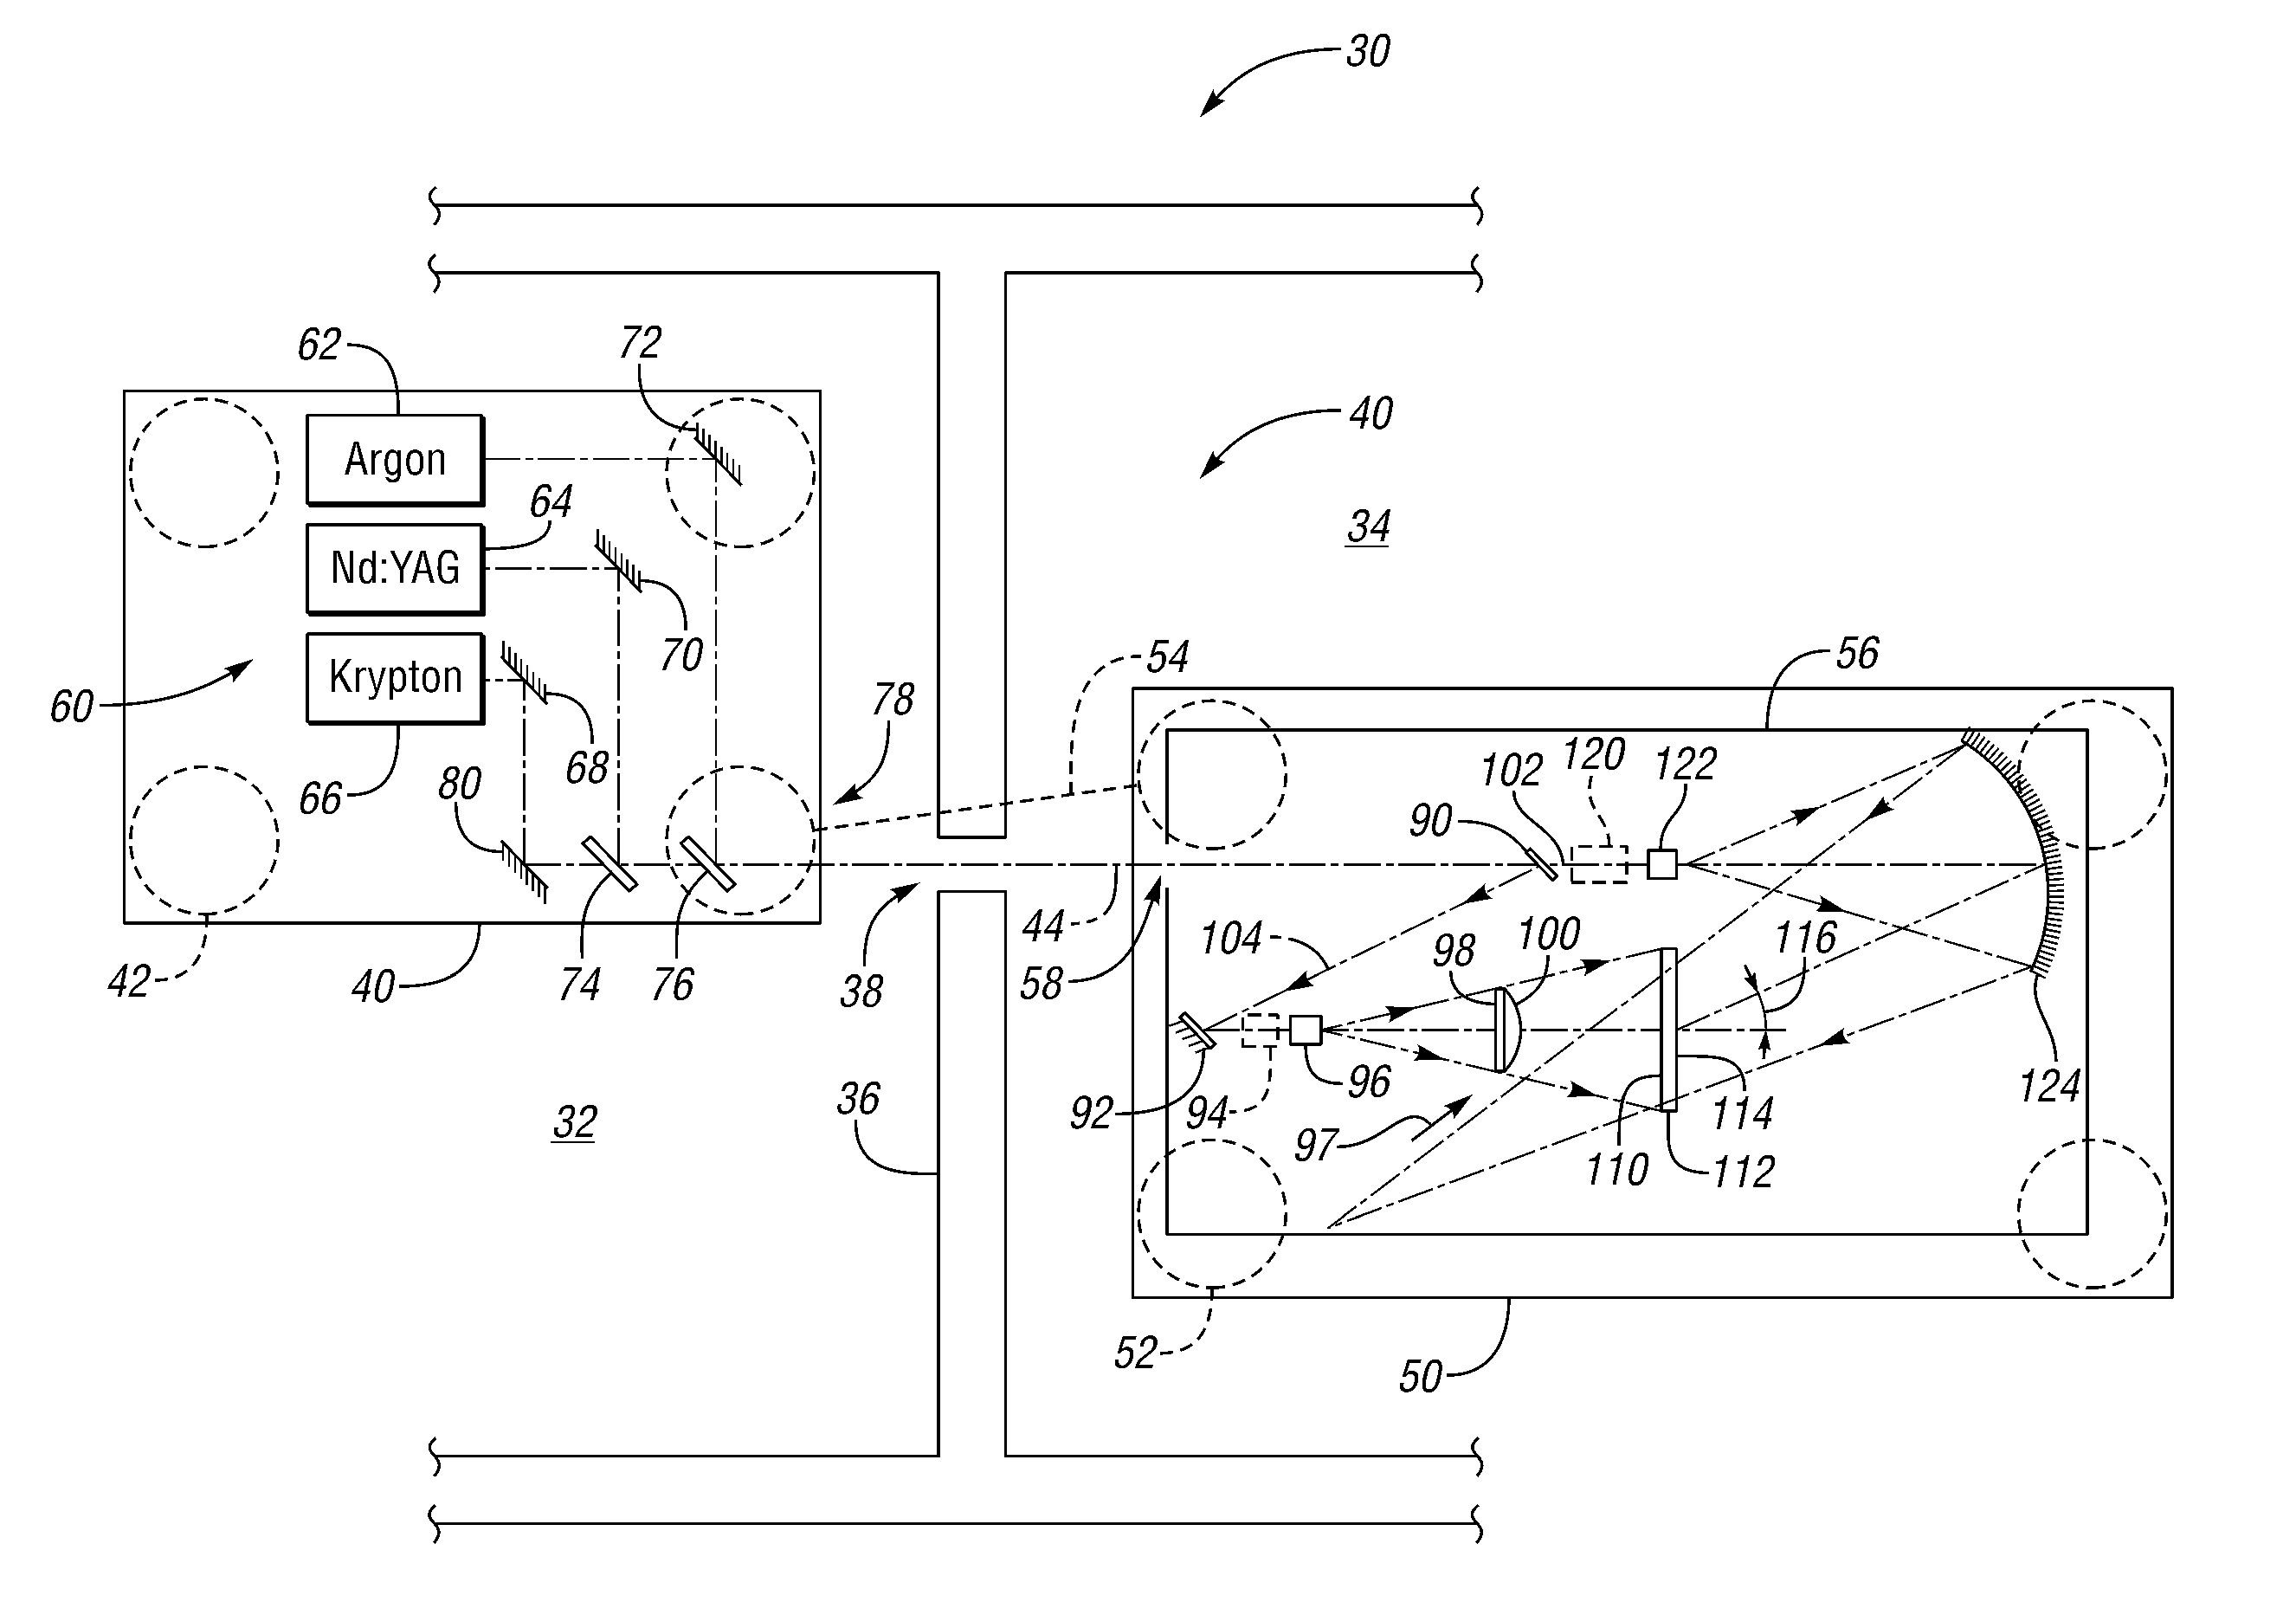 System and Method for Autostereoscopic Imaging Using Holographic Optical Element